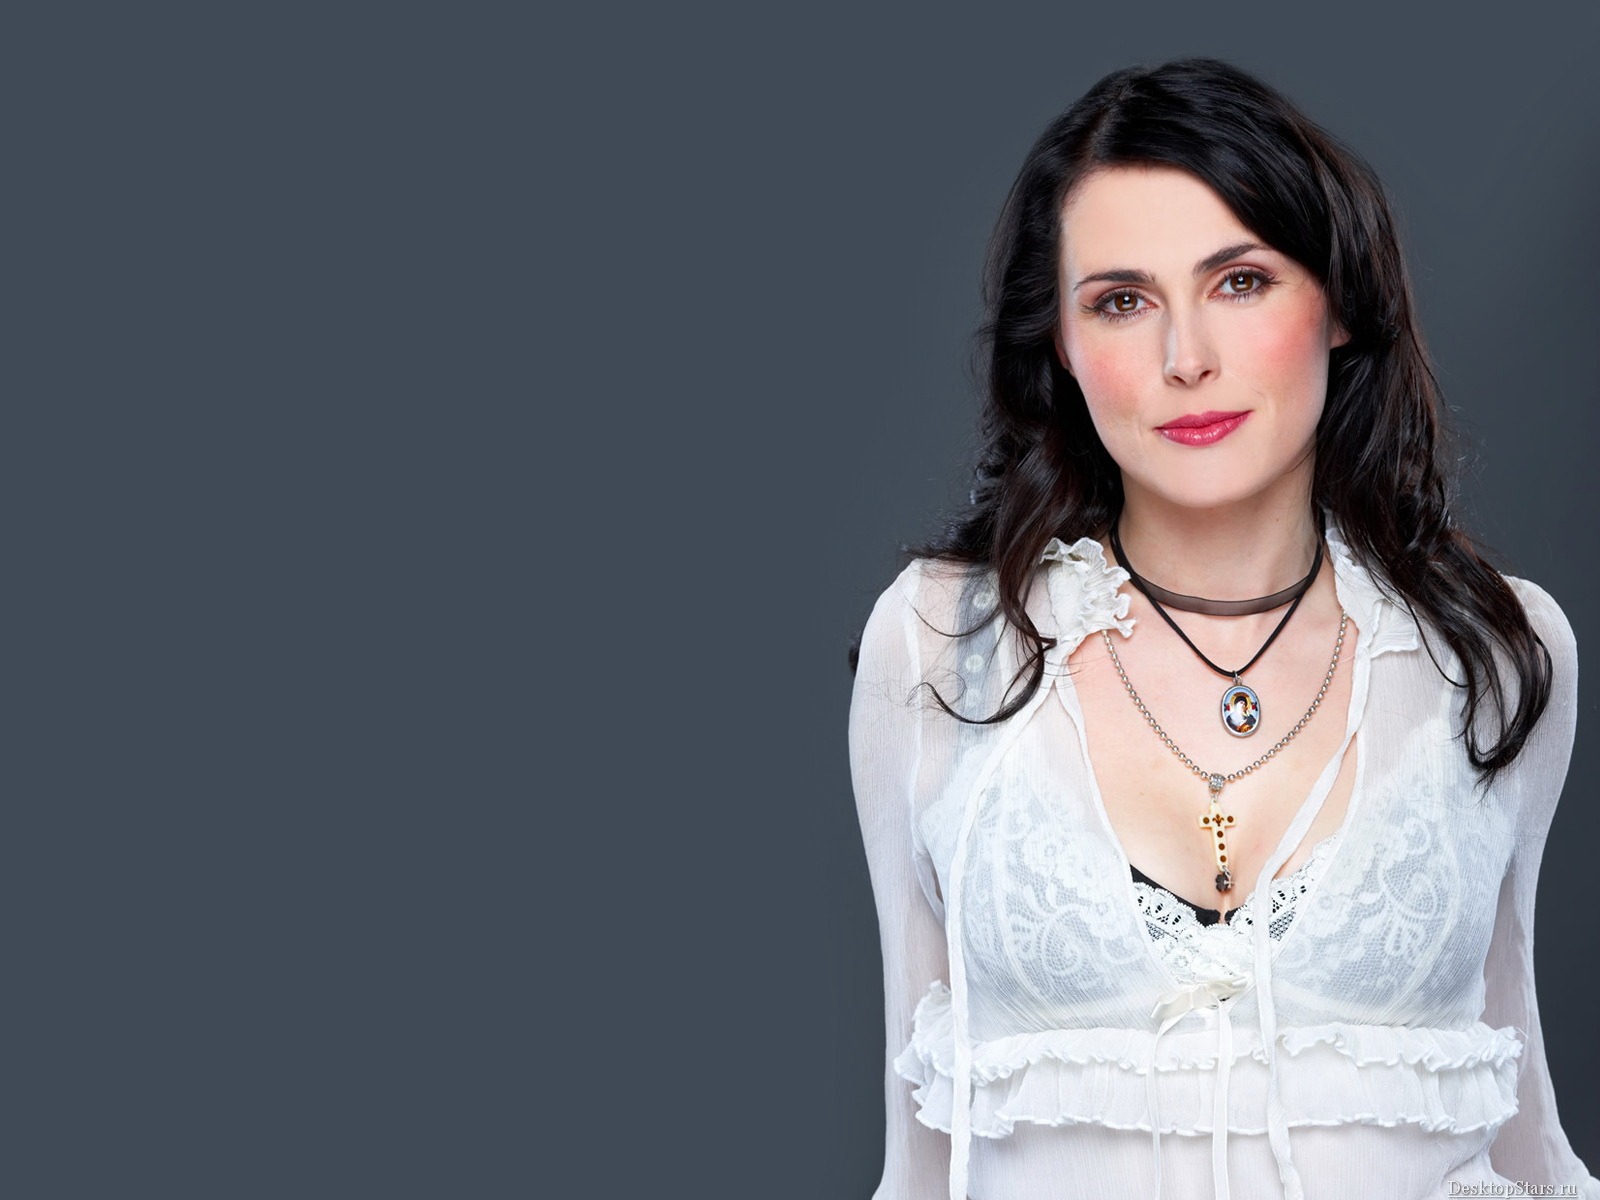 Sharon den Adel #006 - 1600x1200 Wallpapers Pictures Photos Images